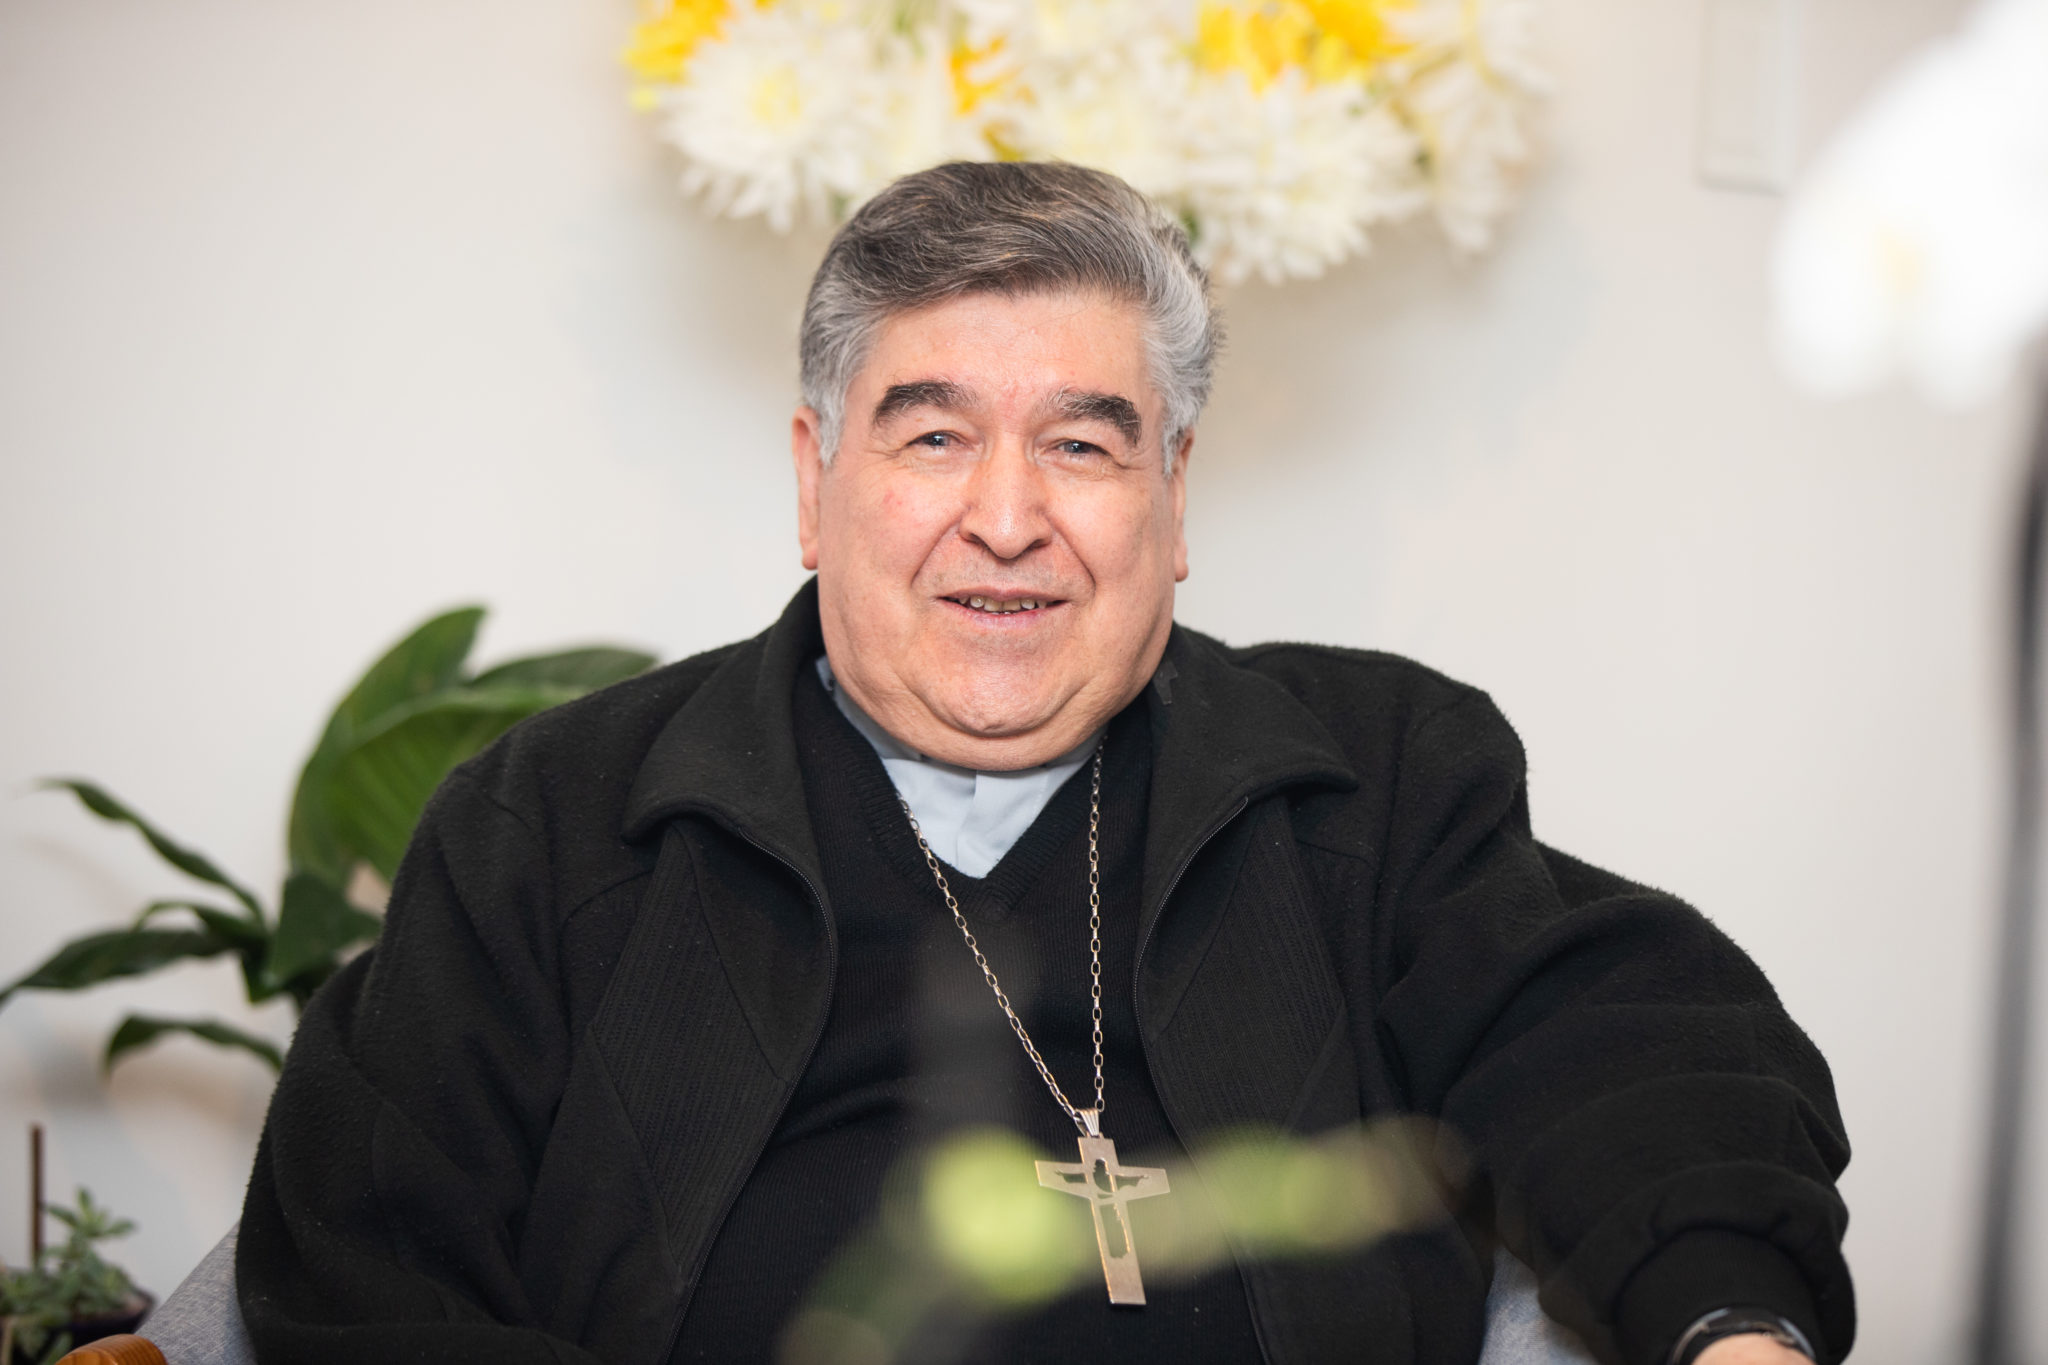 Consistory of Cardinals: Exclusive Interview with Monsignor Felipe Arizmendi